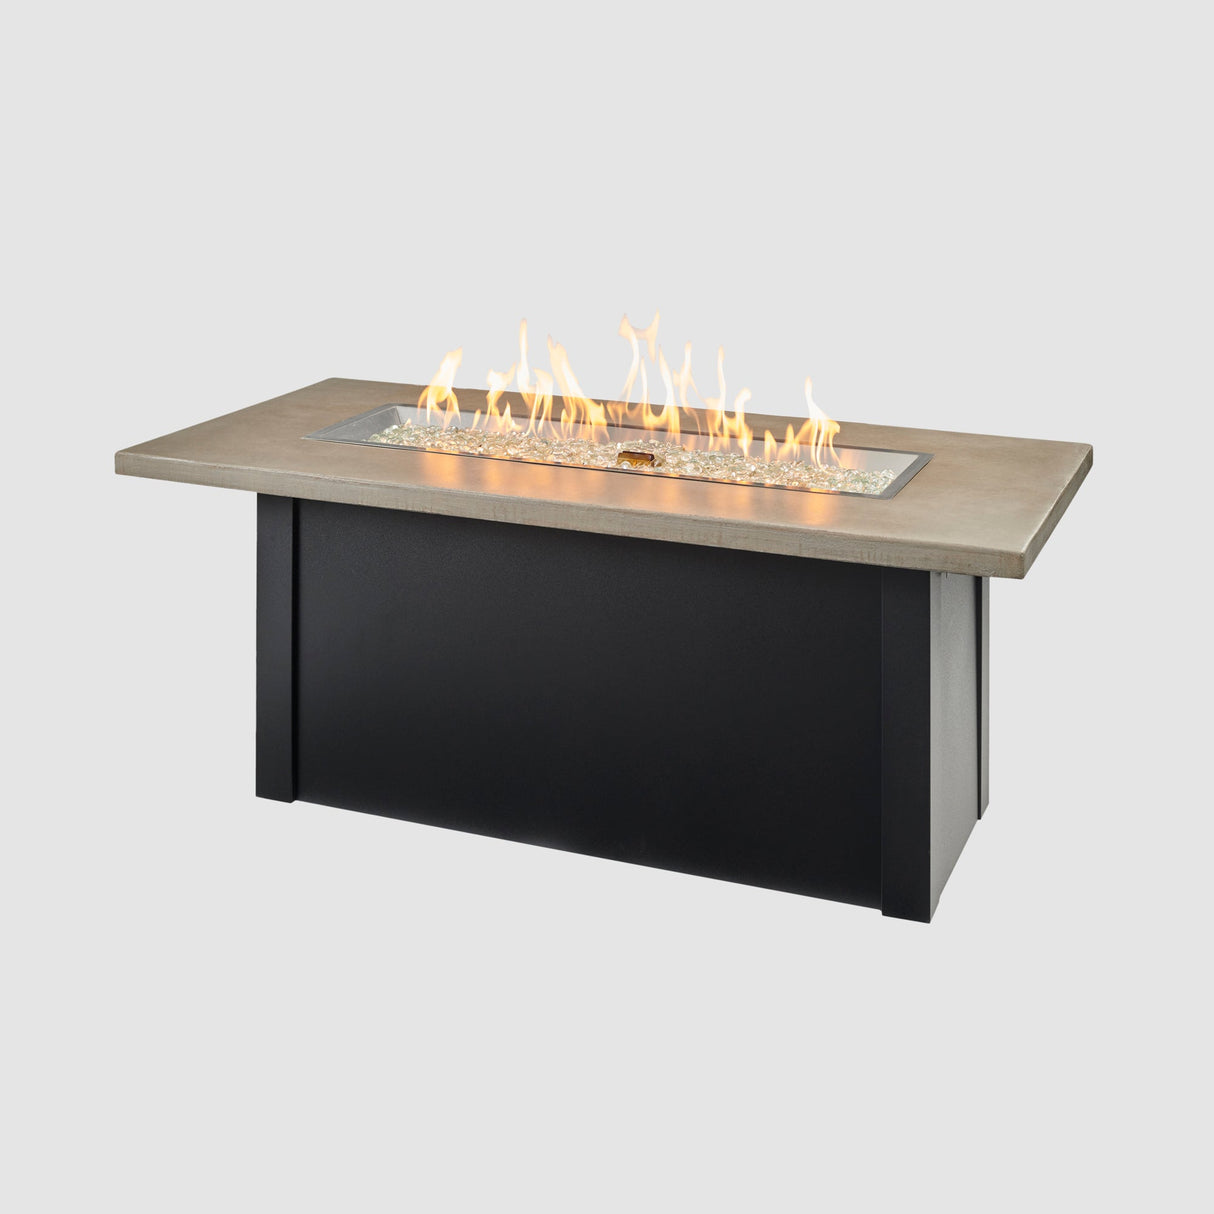 Havenwood Linear Gas Fire Pit Table with a Pebble Grey top and Luverne Black base on a grey background